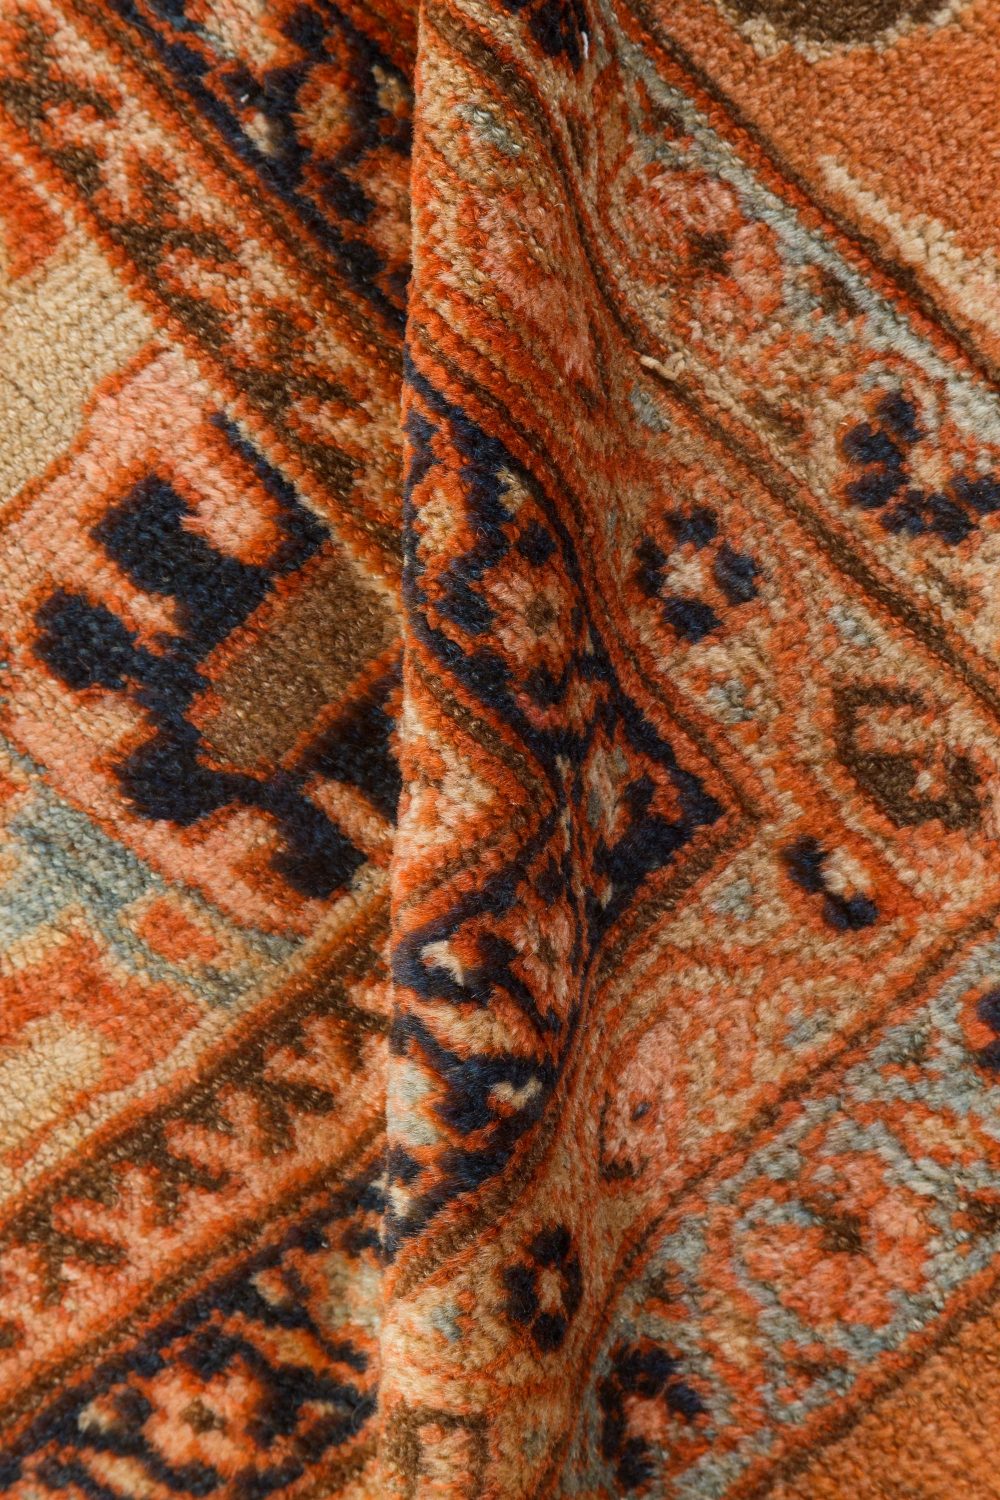 19th Century Persian Sultanabad Handwoven Wool Carpet BB7194